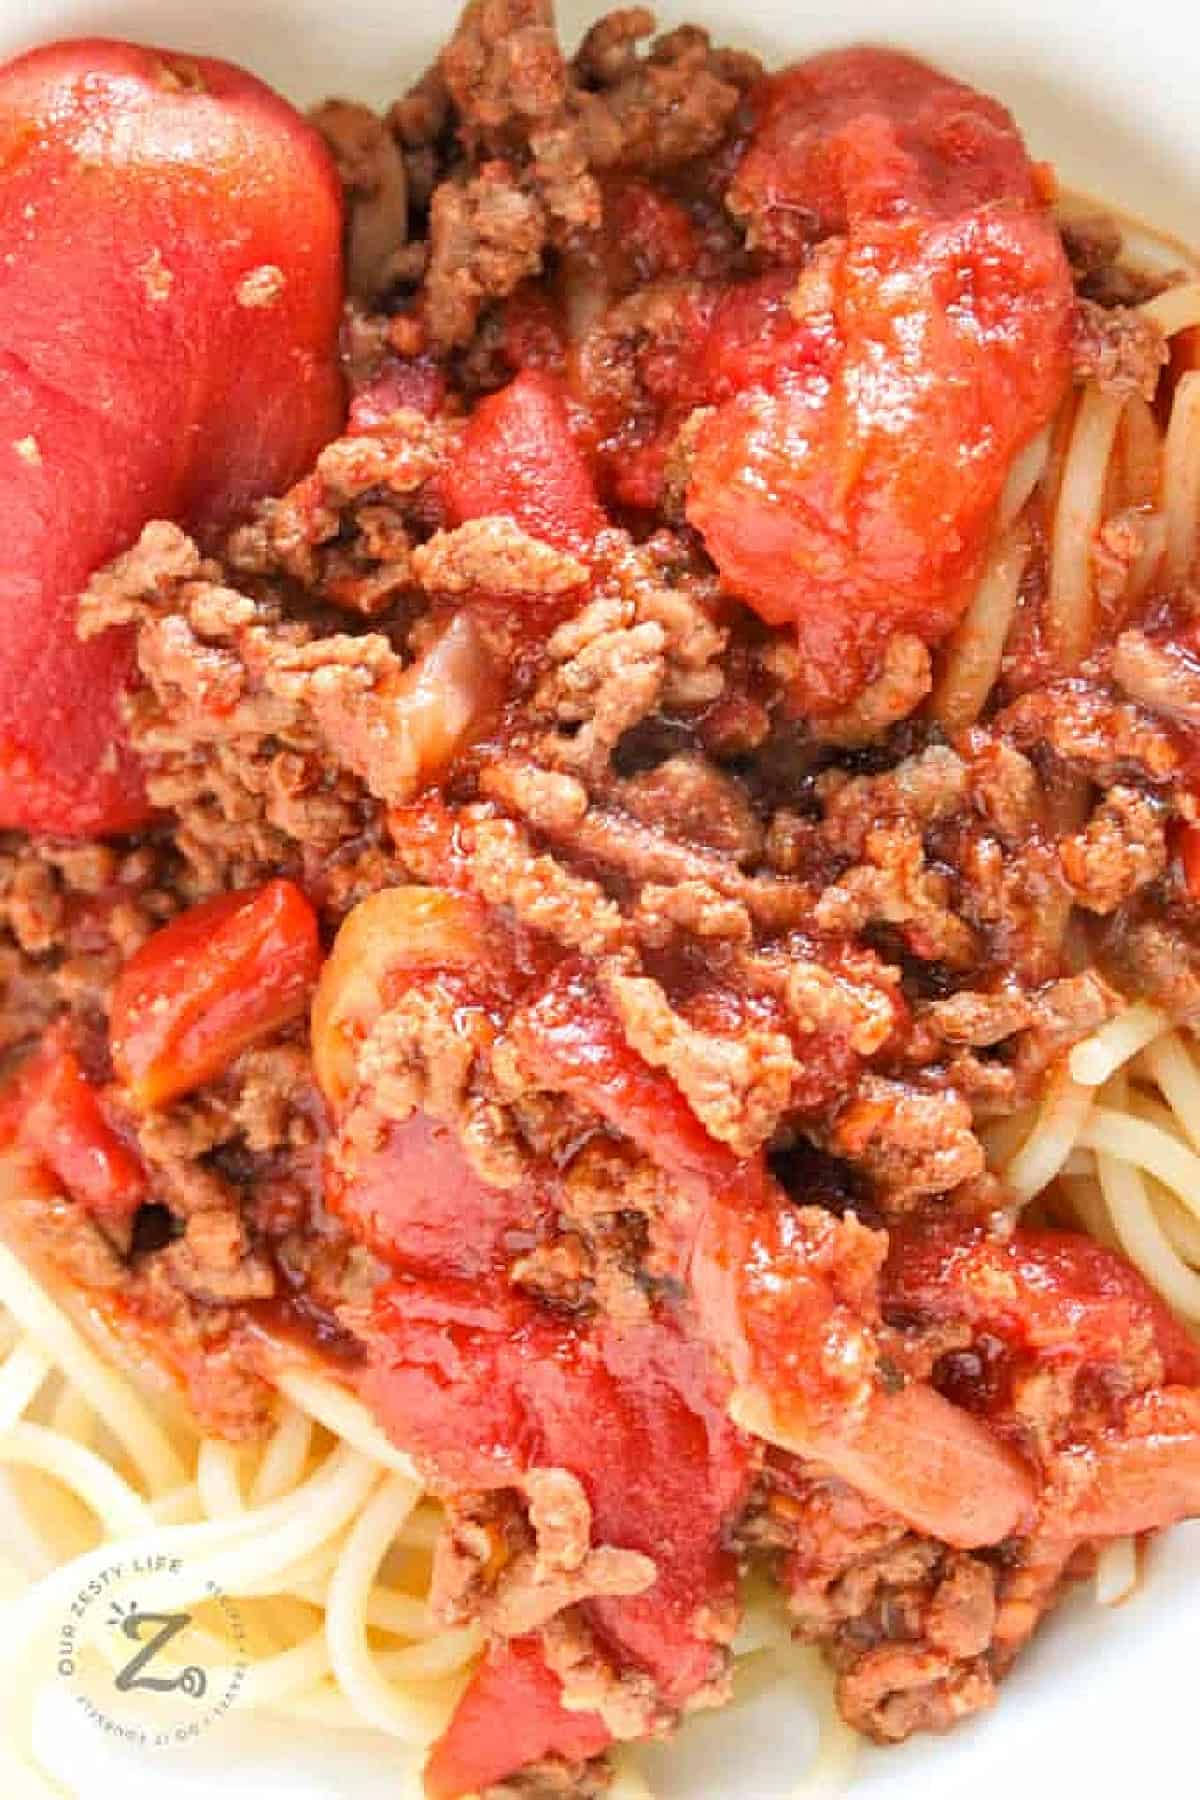 slow cooker spaghetti sauce, served over spaghetti, in a white bowl